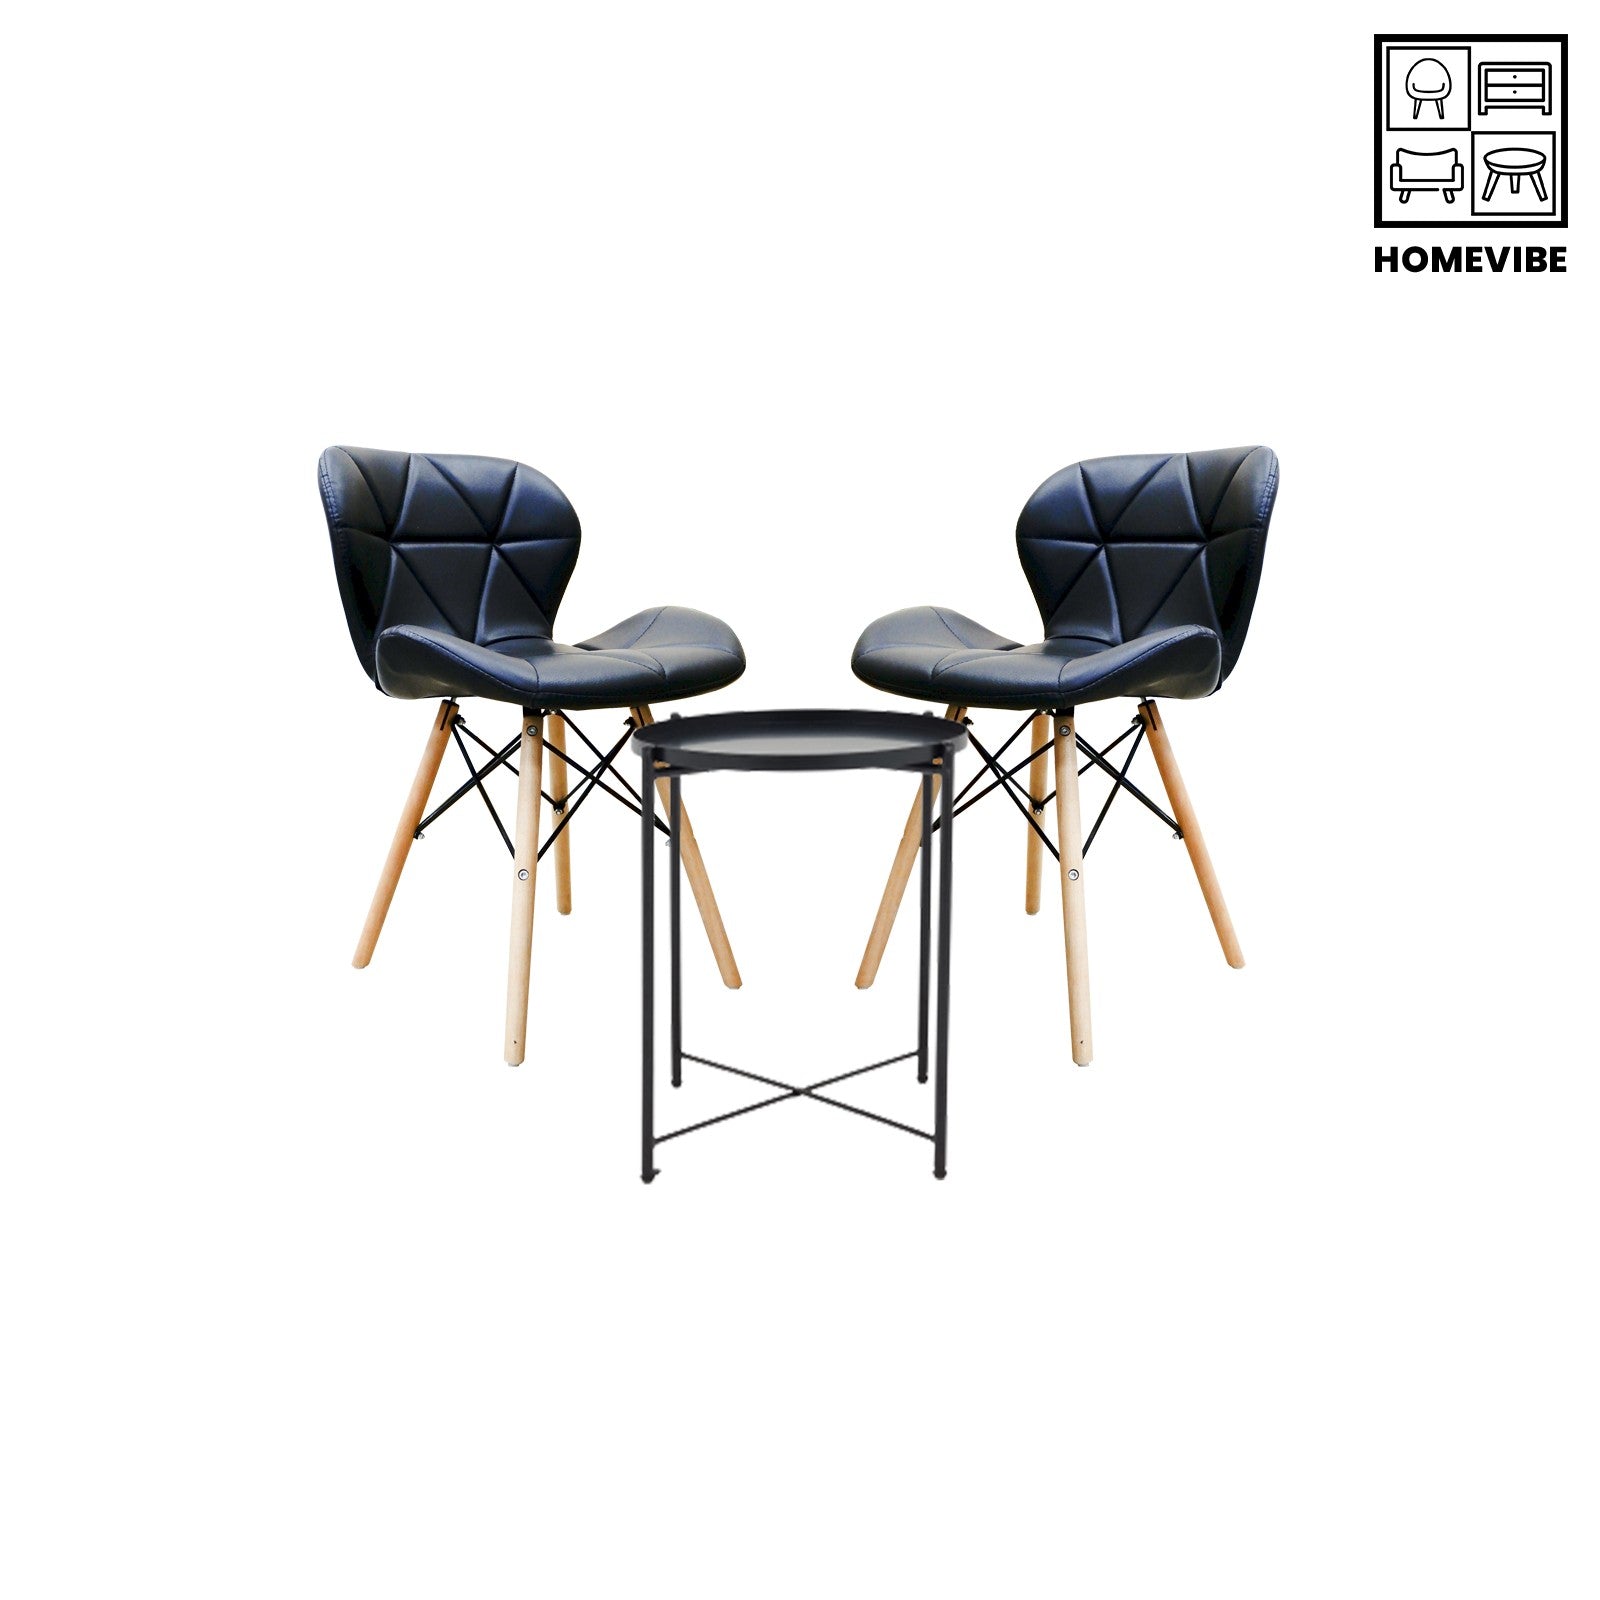 HV Elio Round Table + 2 Butterfly Chair Set | HomeVibe PH | Buy Online Furniture and Home Furnishings